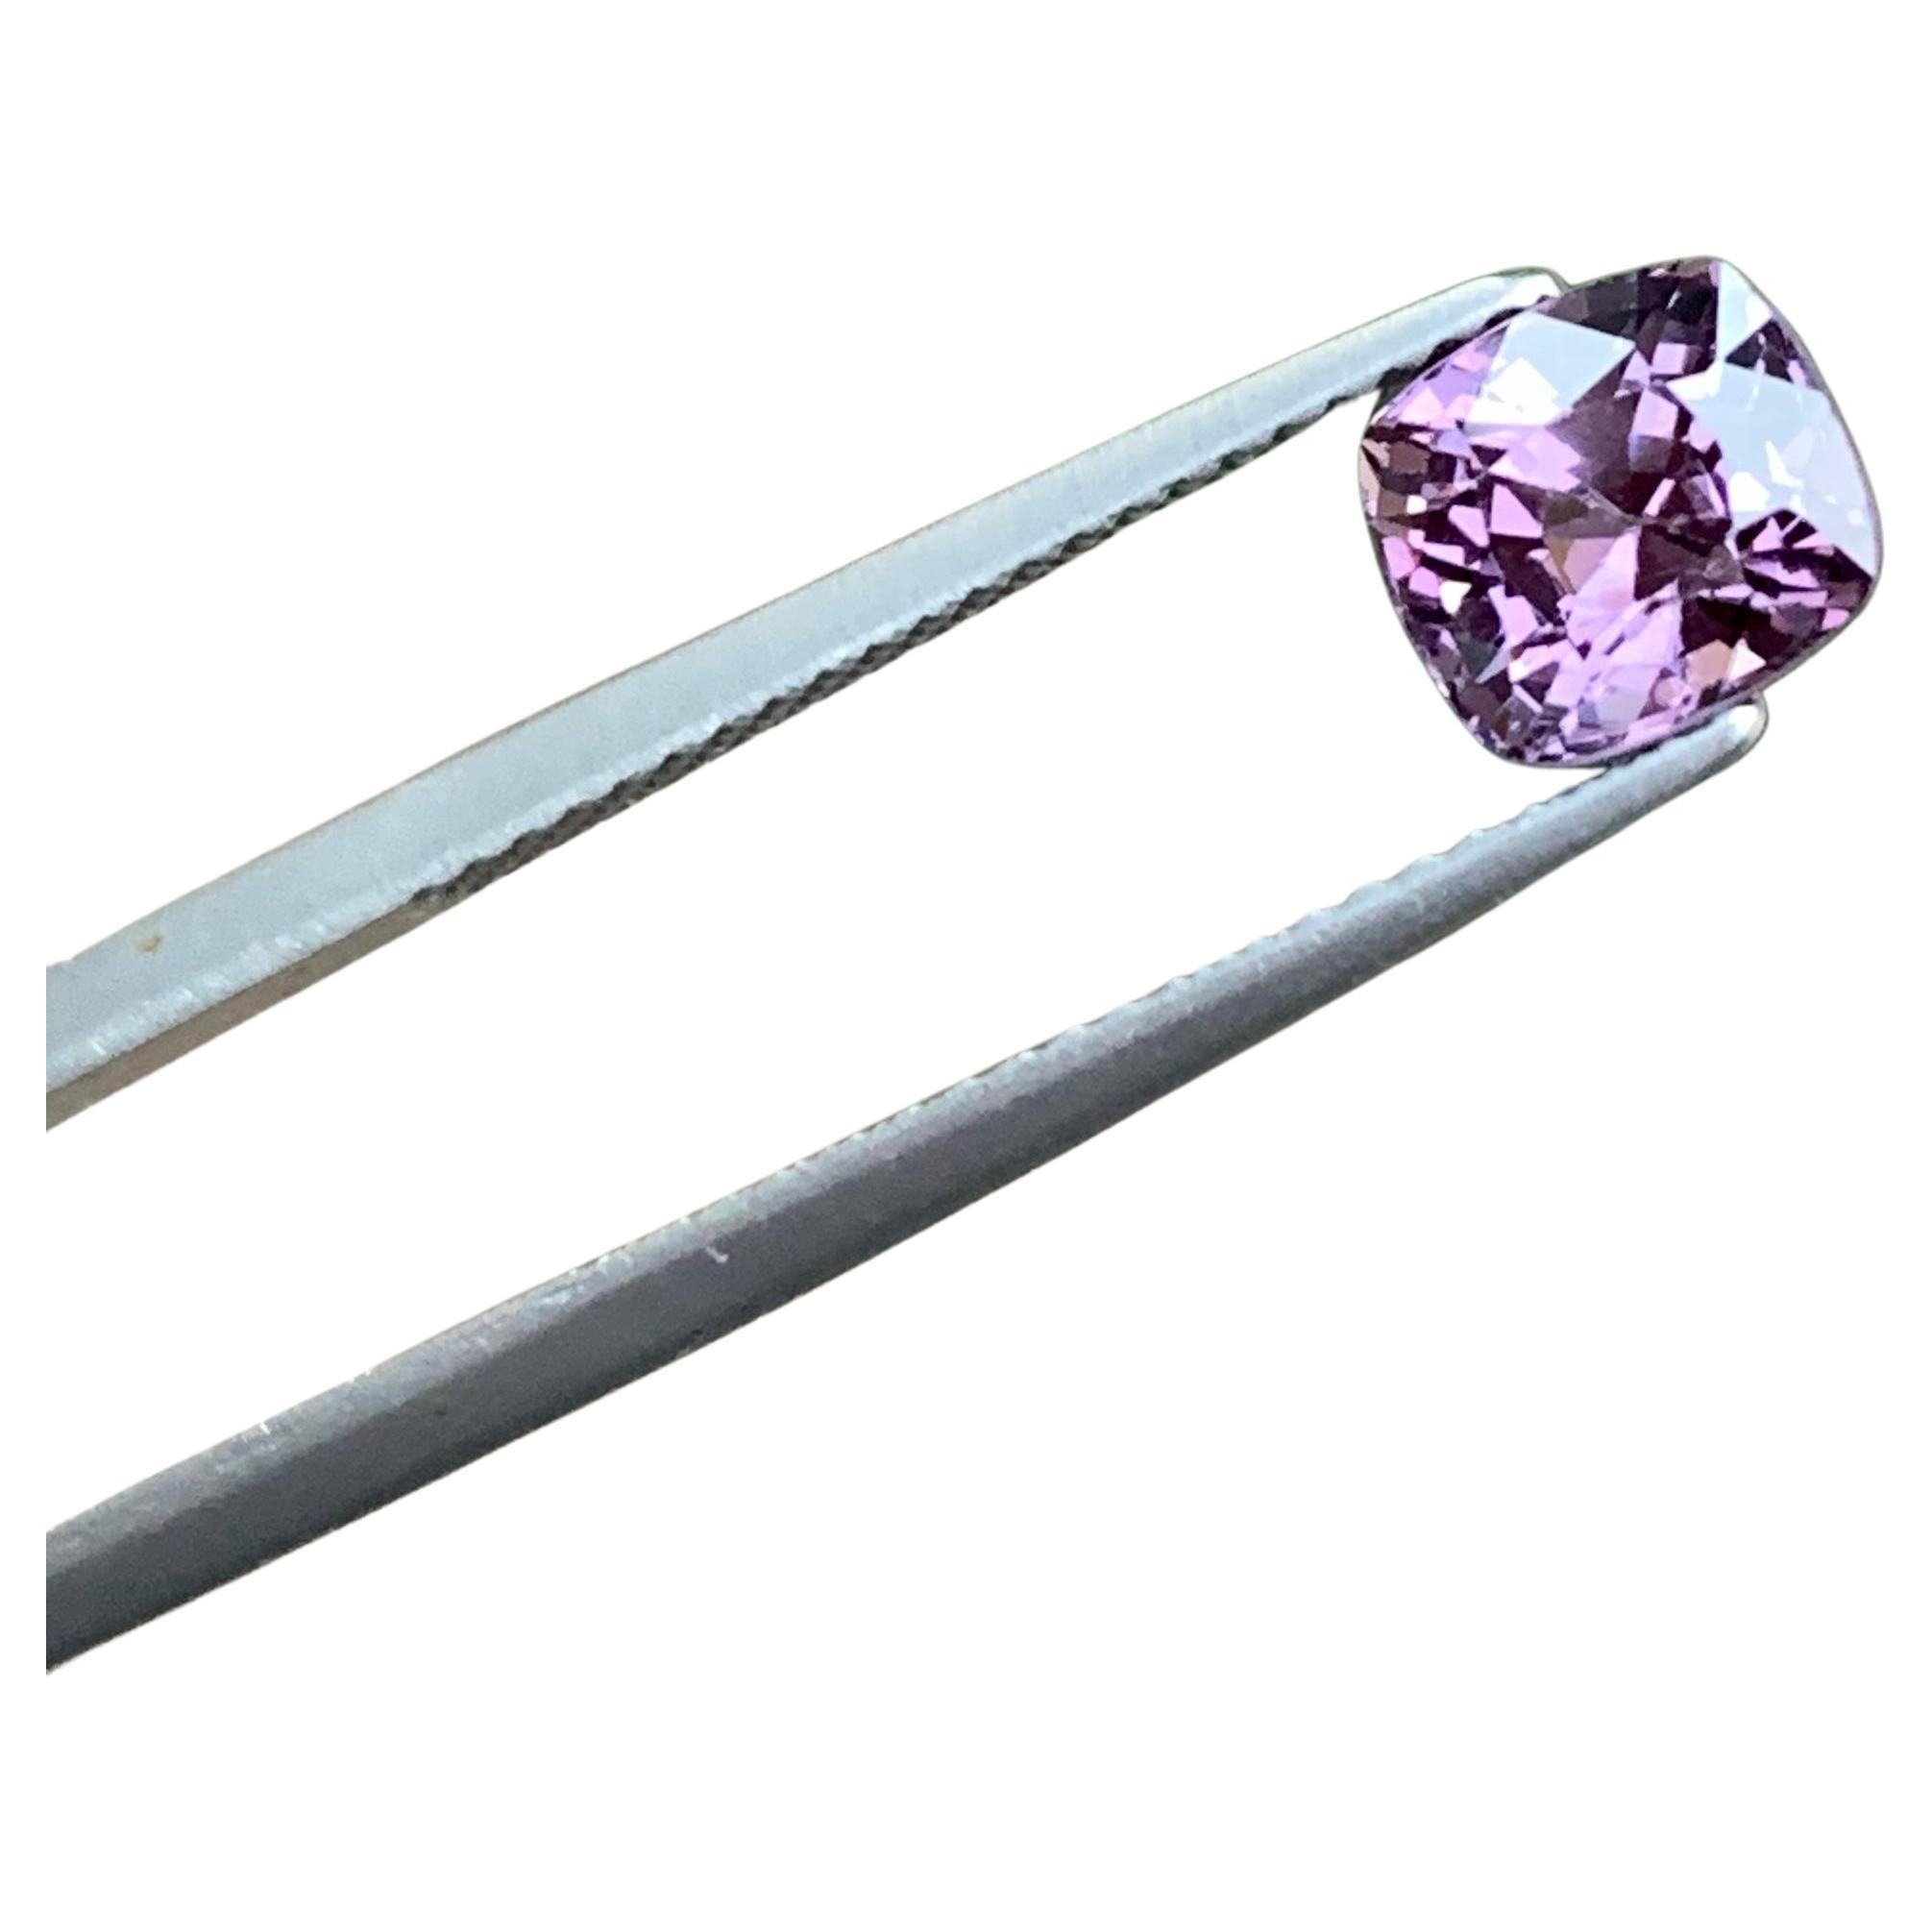 Precious Natural Spinel For Ring 1.75 CT Burma Spinel Gemstone For Jewelry Size  For Sale